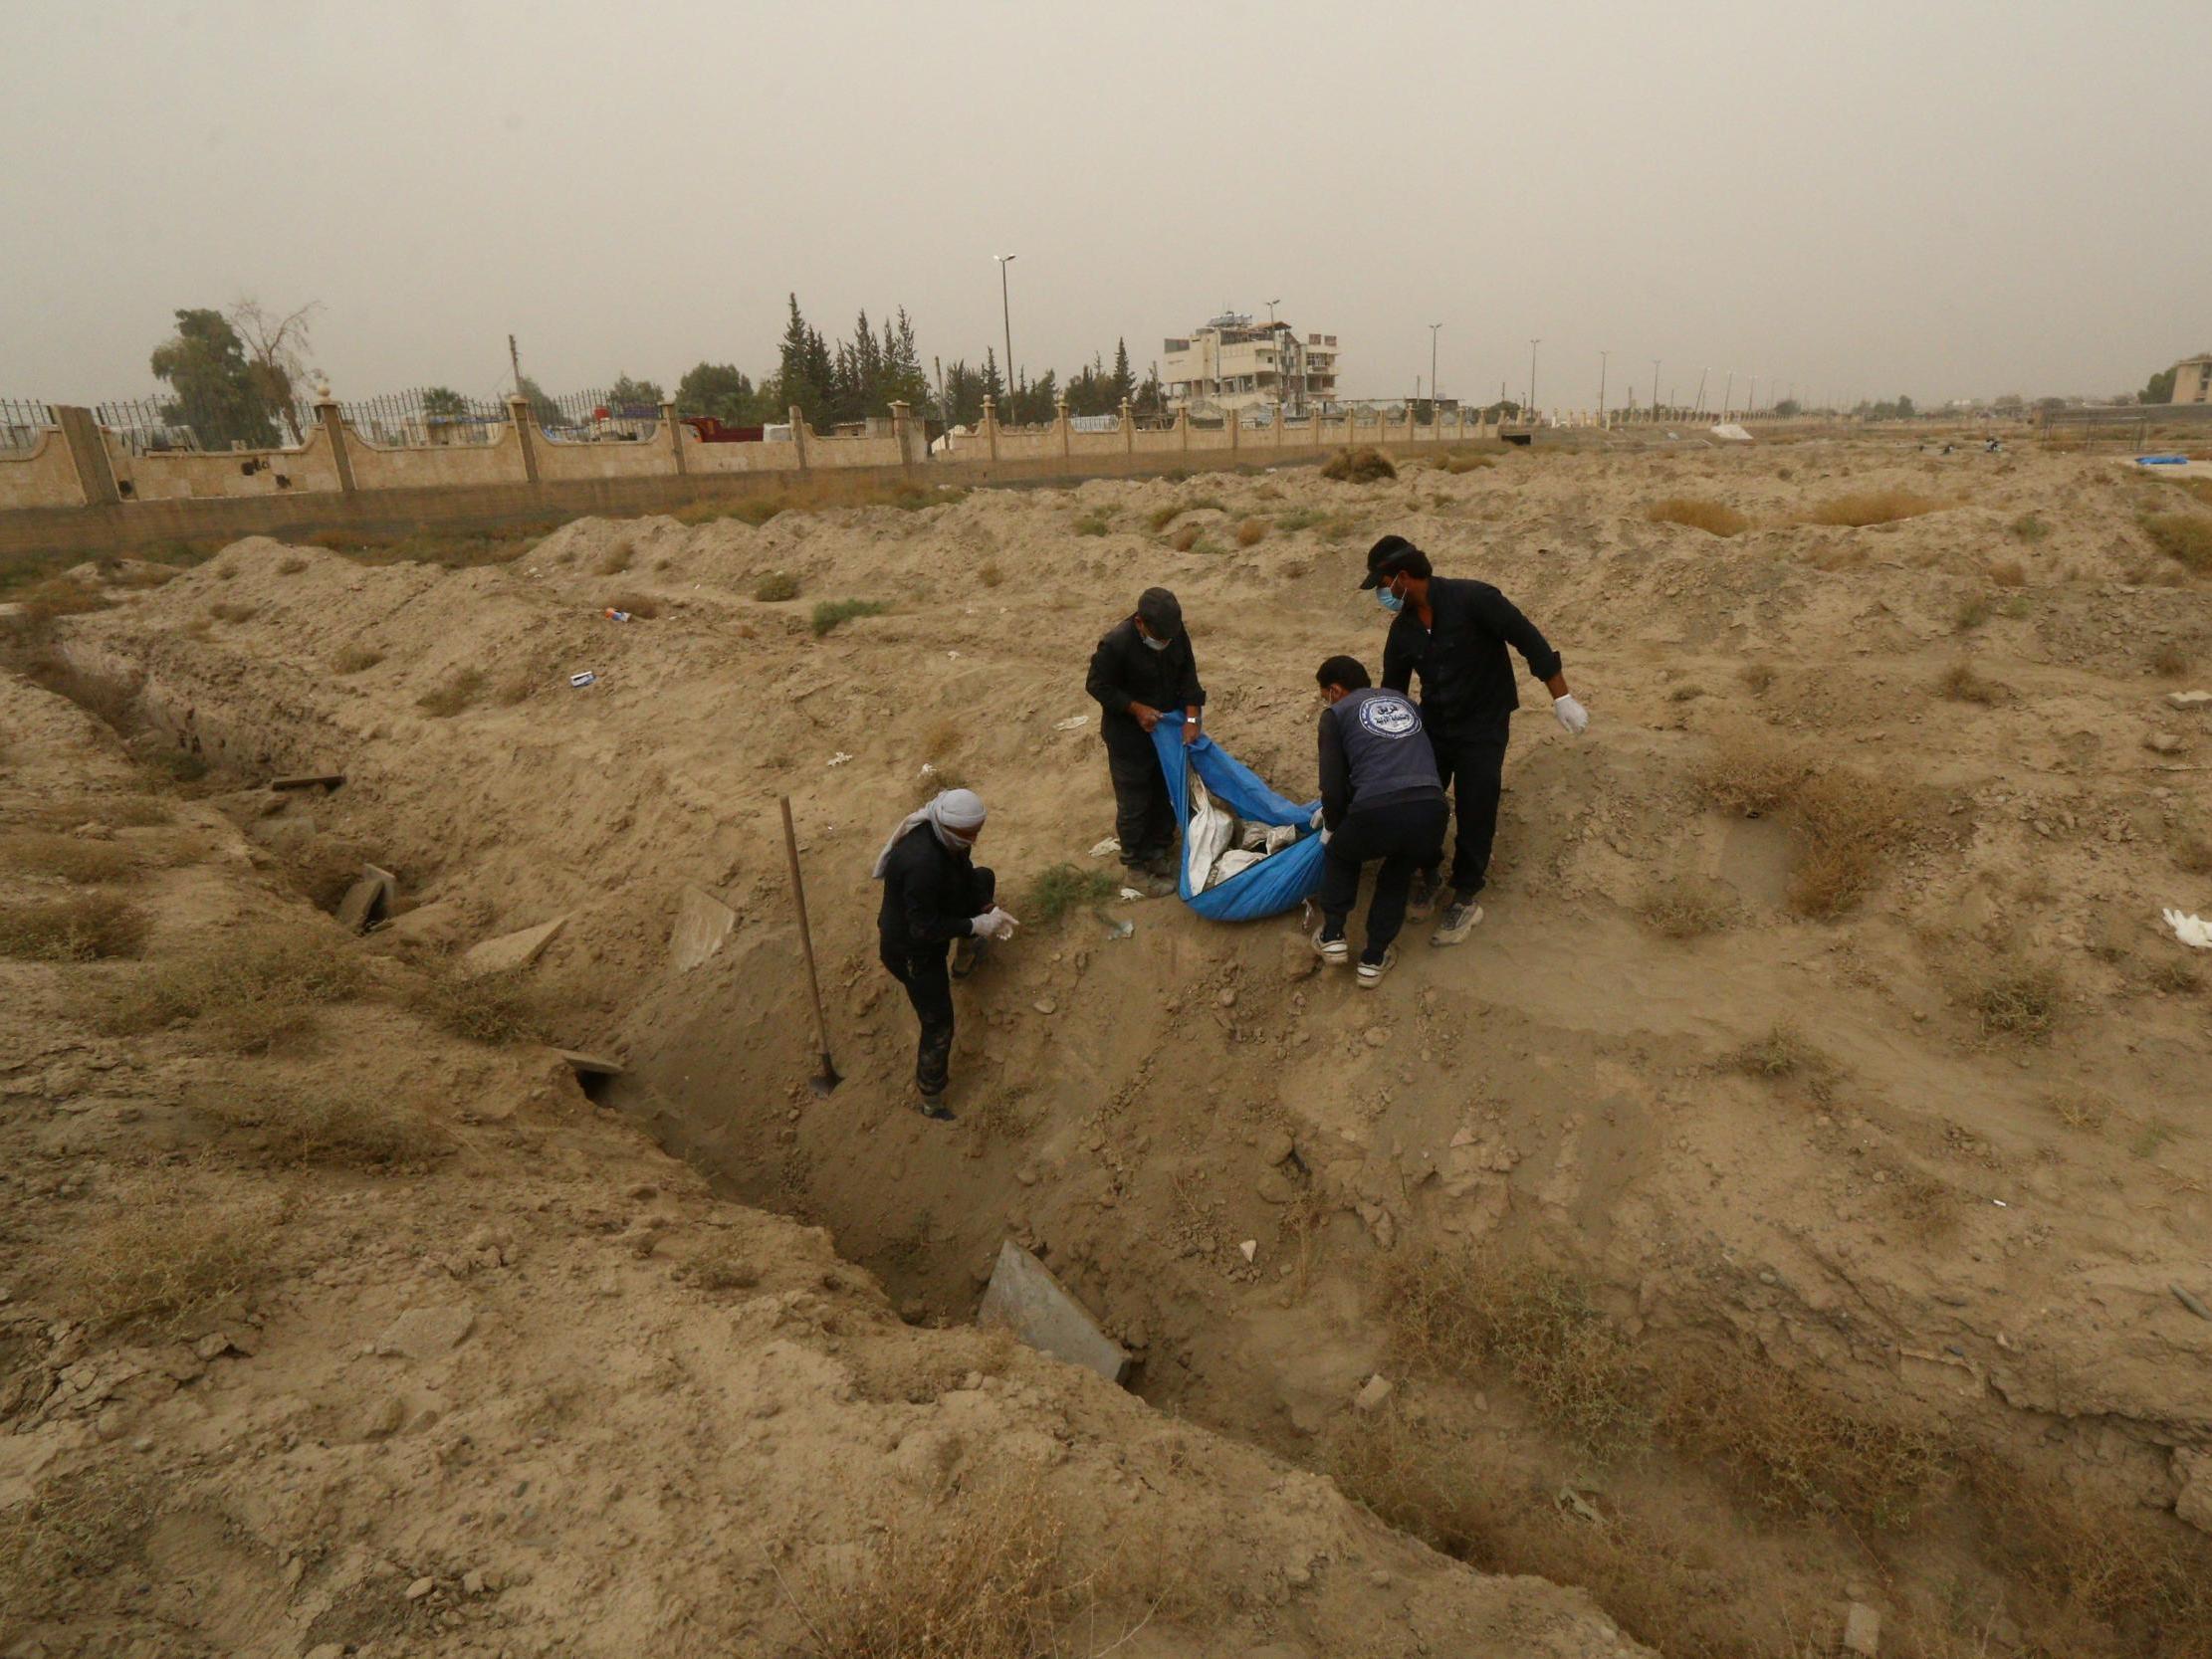 People work at a mass grave in Raqqa, Syria on 16 October